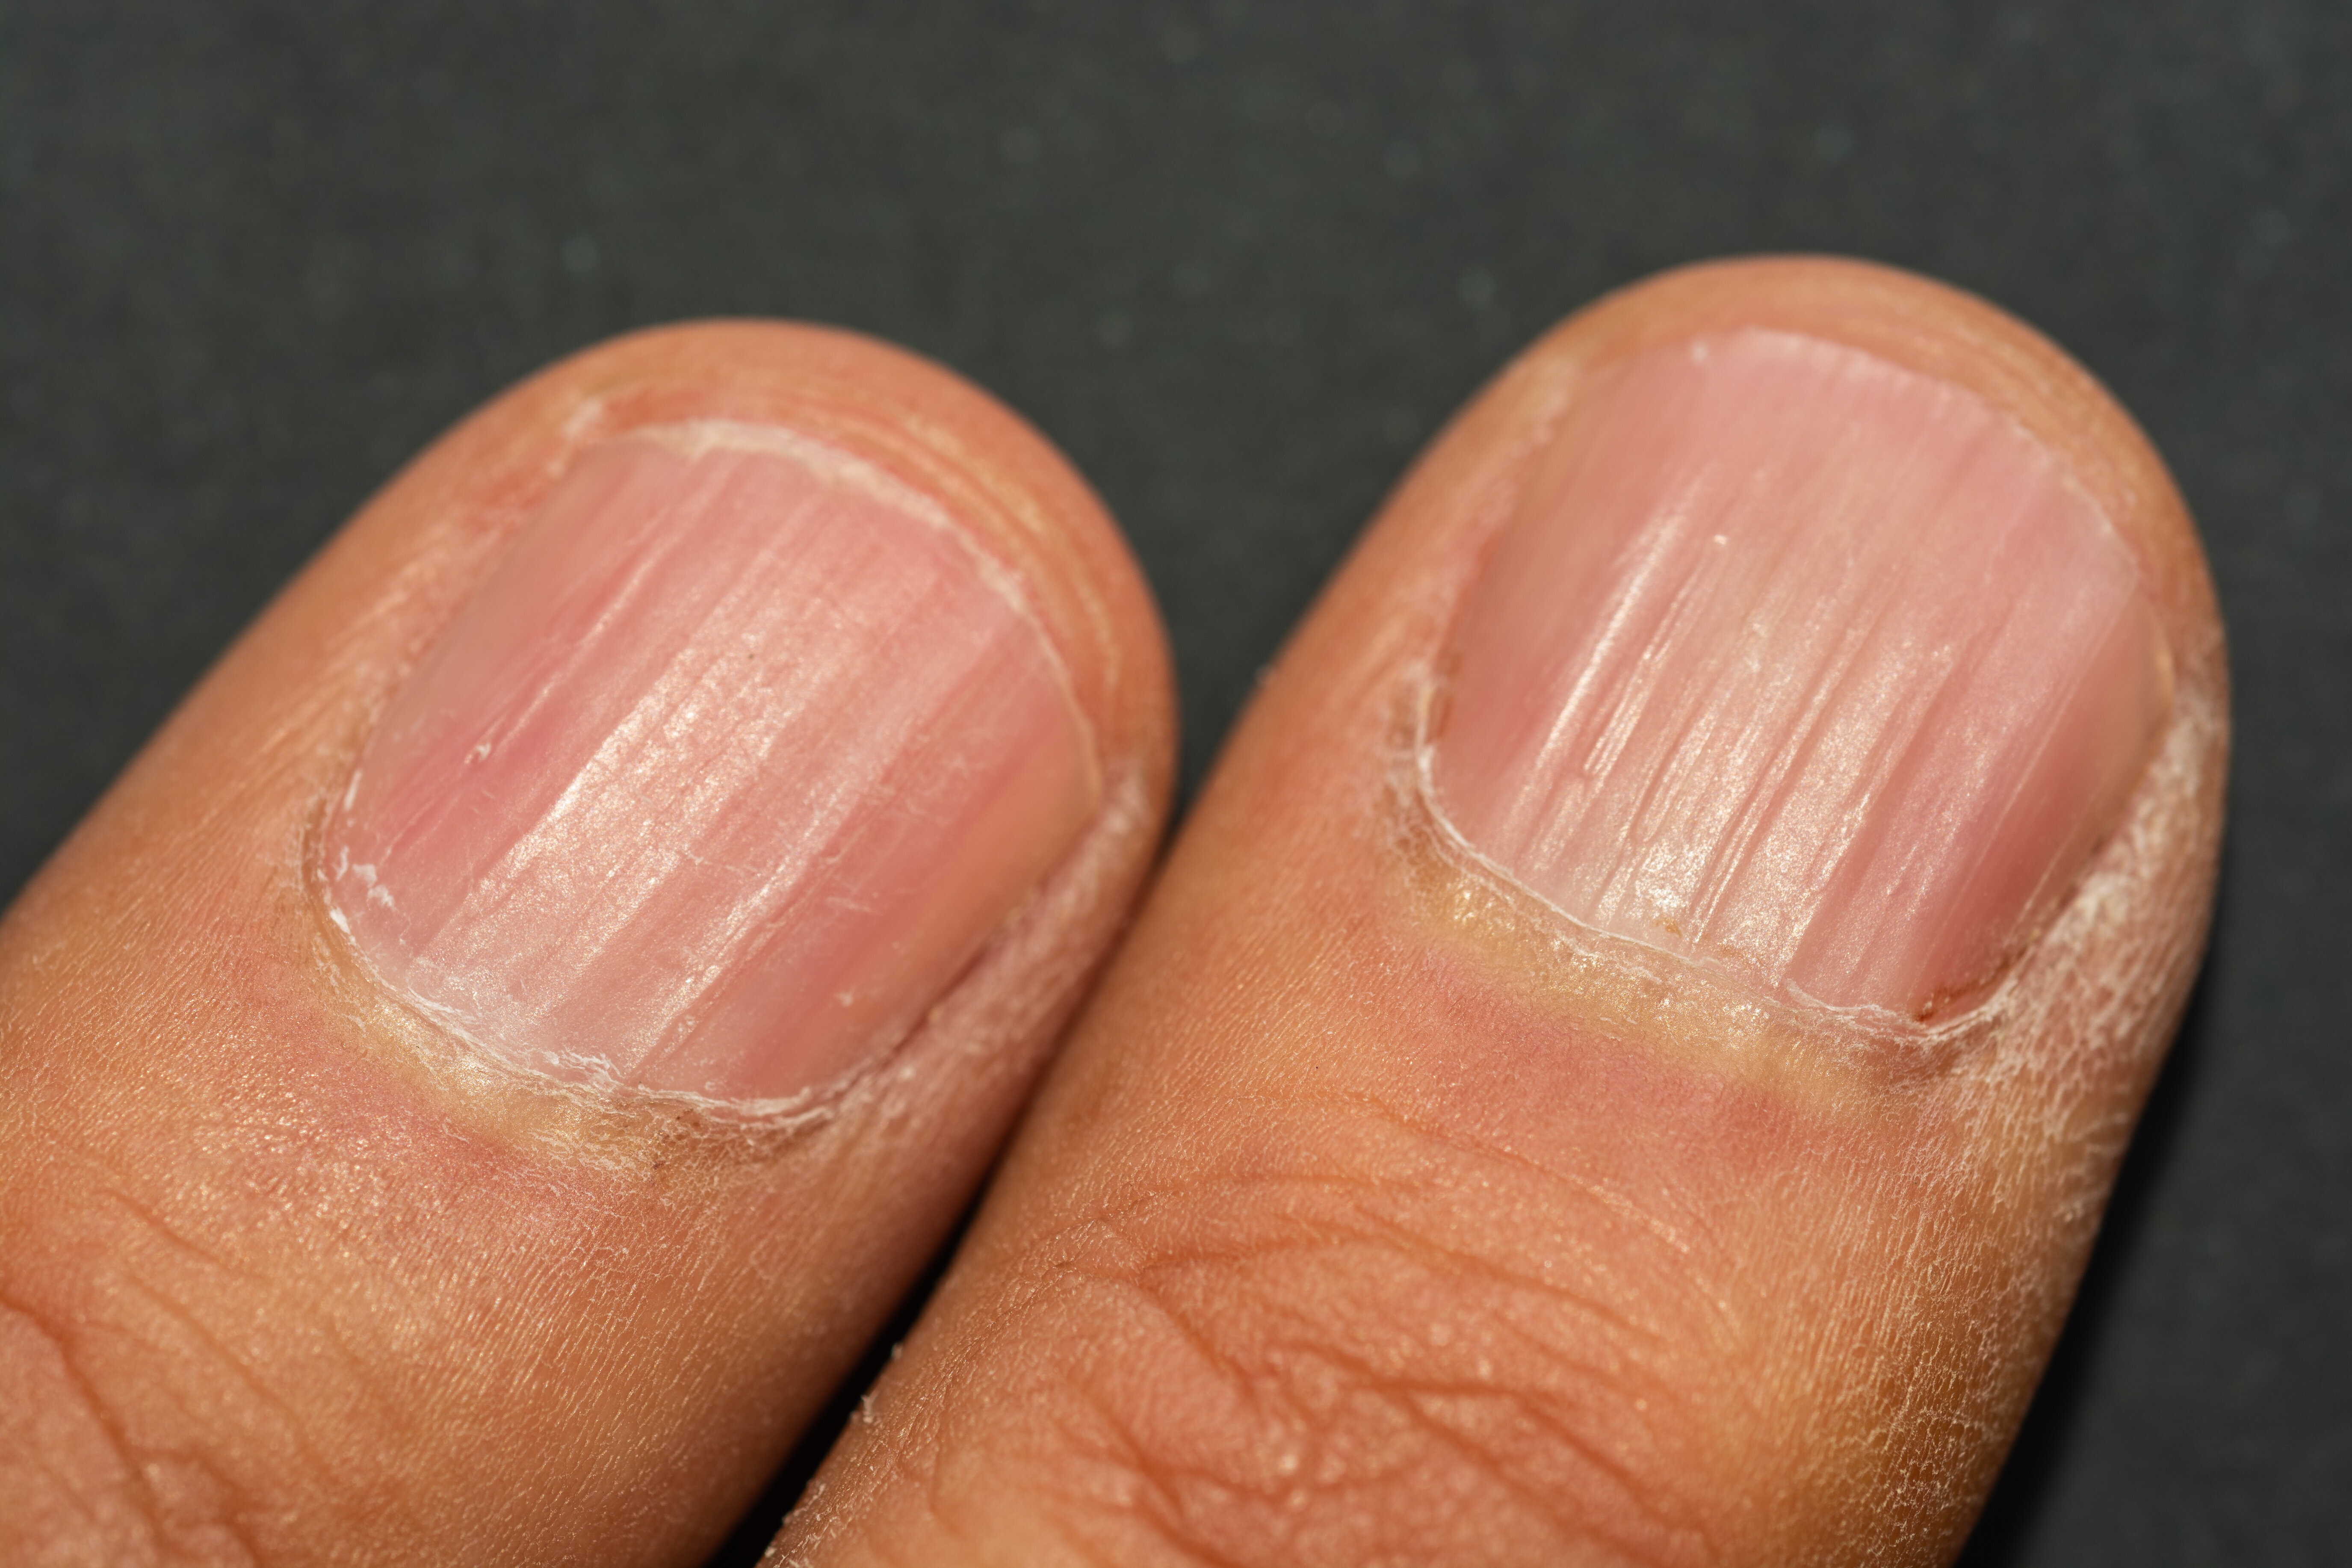 Health problems your fingernails can indicate - from white spots to ridges  - Mirror Online